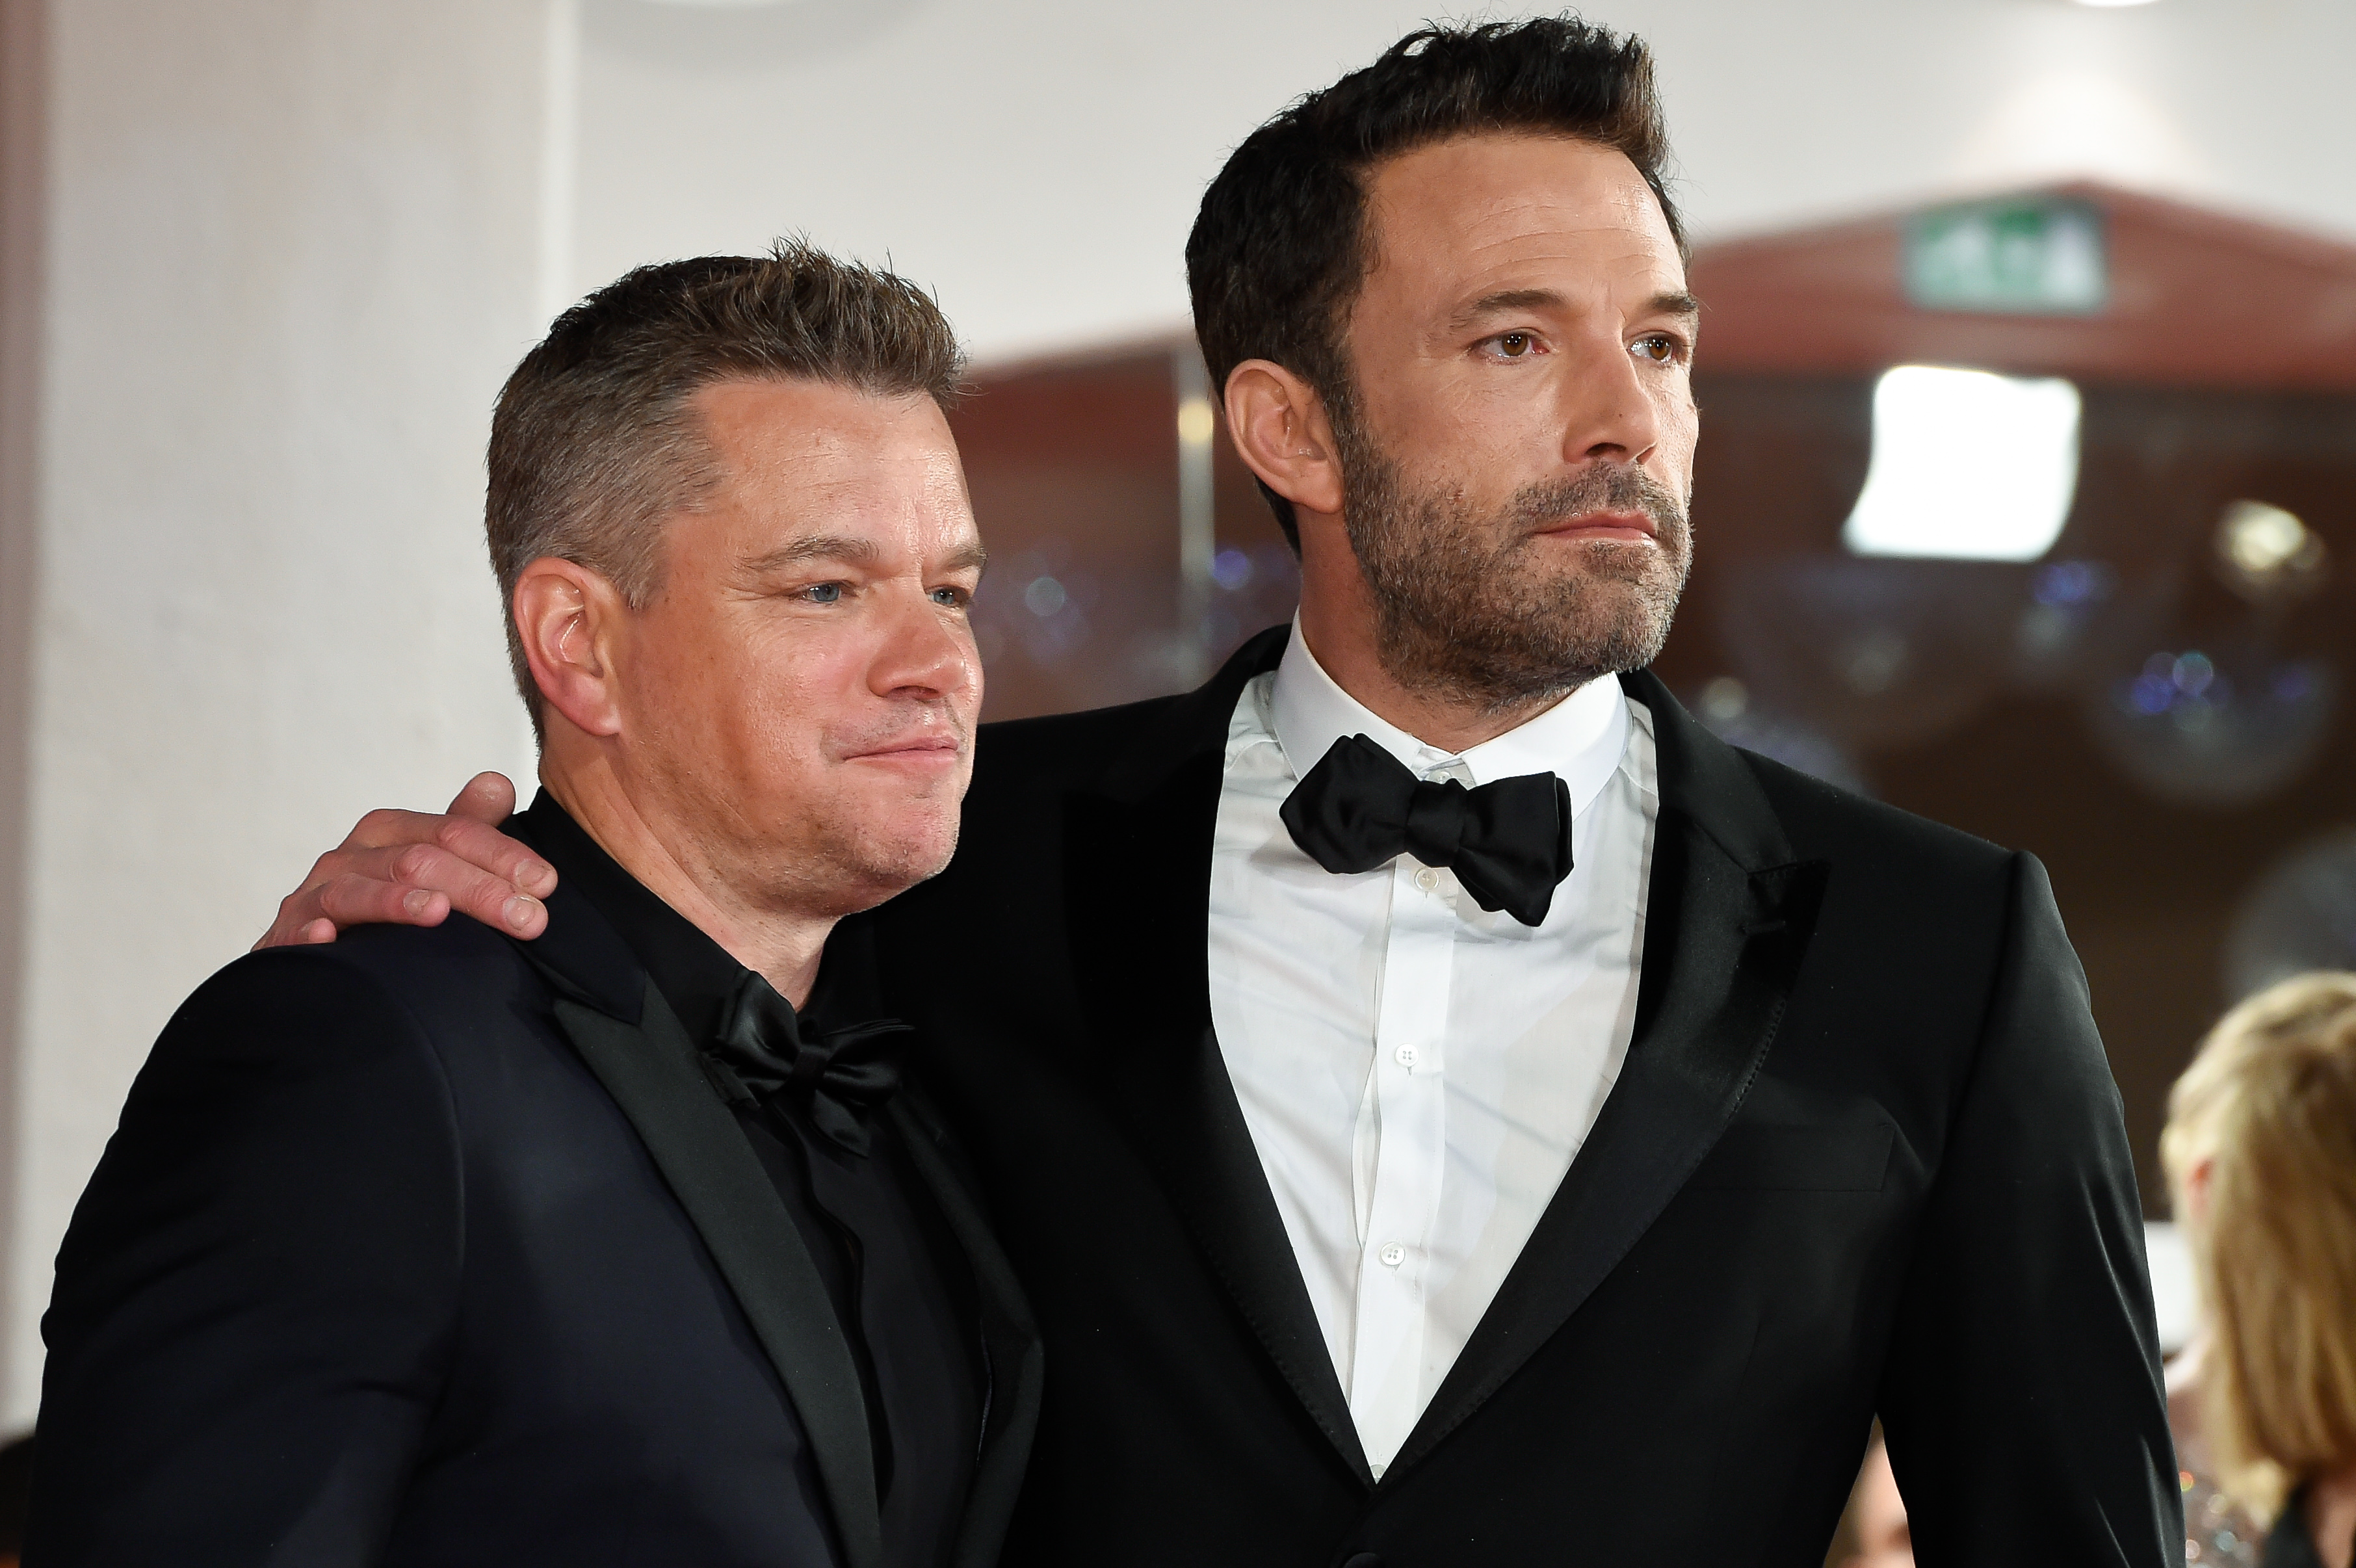 The Last Duel Matt Damon And Ben Affleck Reveal The Accent Actors Use In The Film